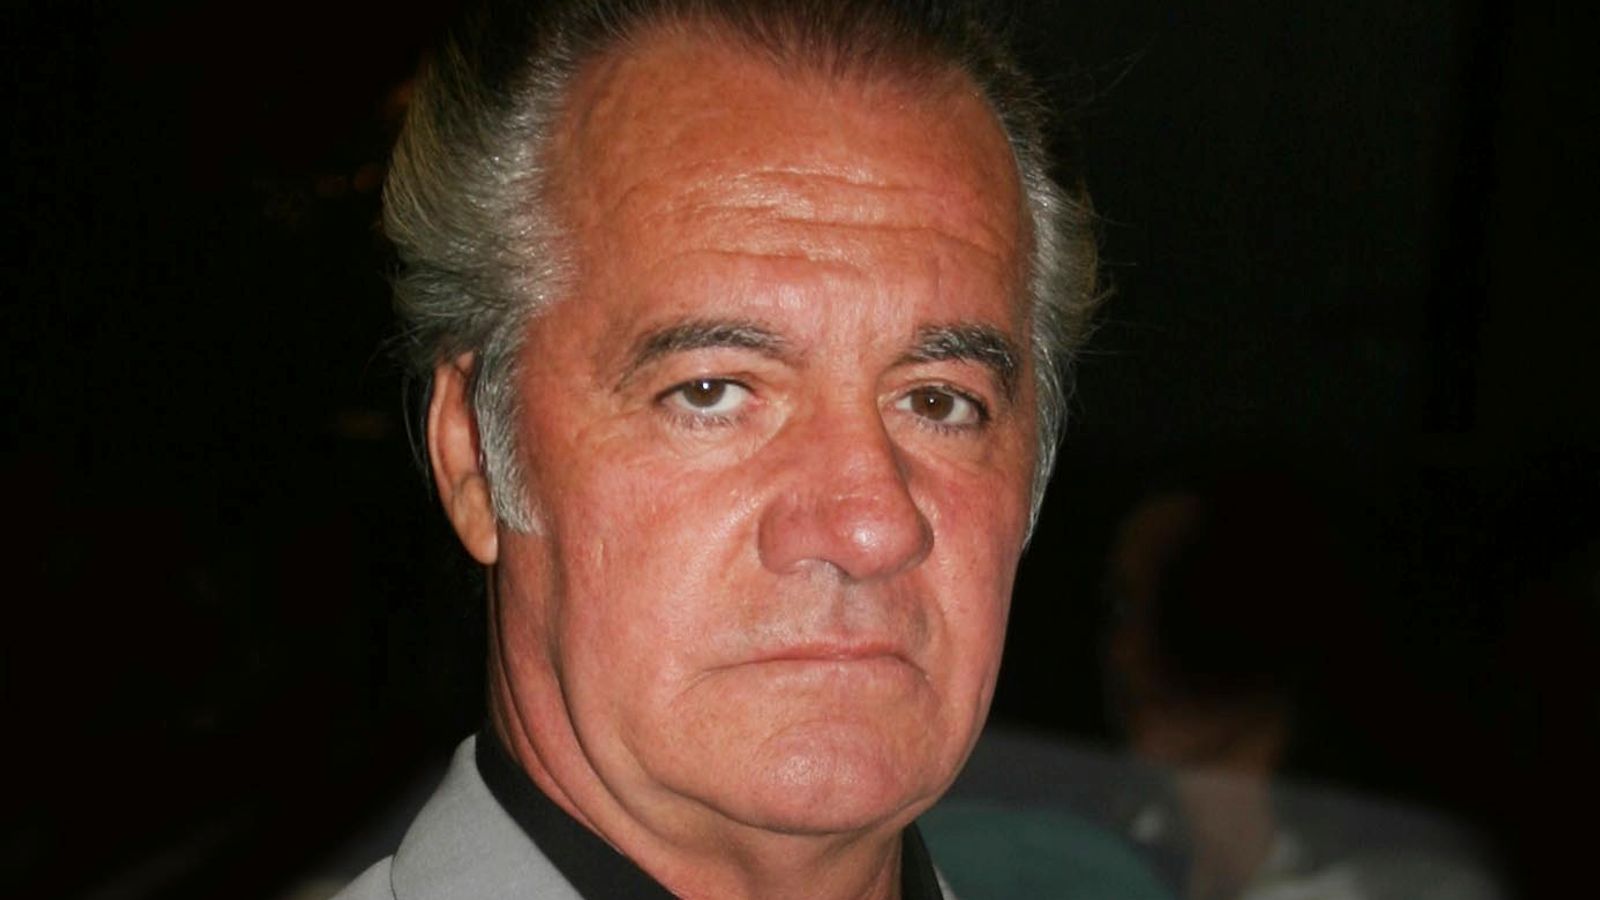 Sopranos actor Tony Sirico, known for his role as Paulie 'Walnuts